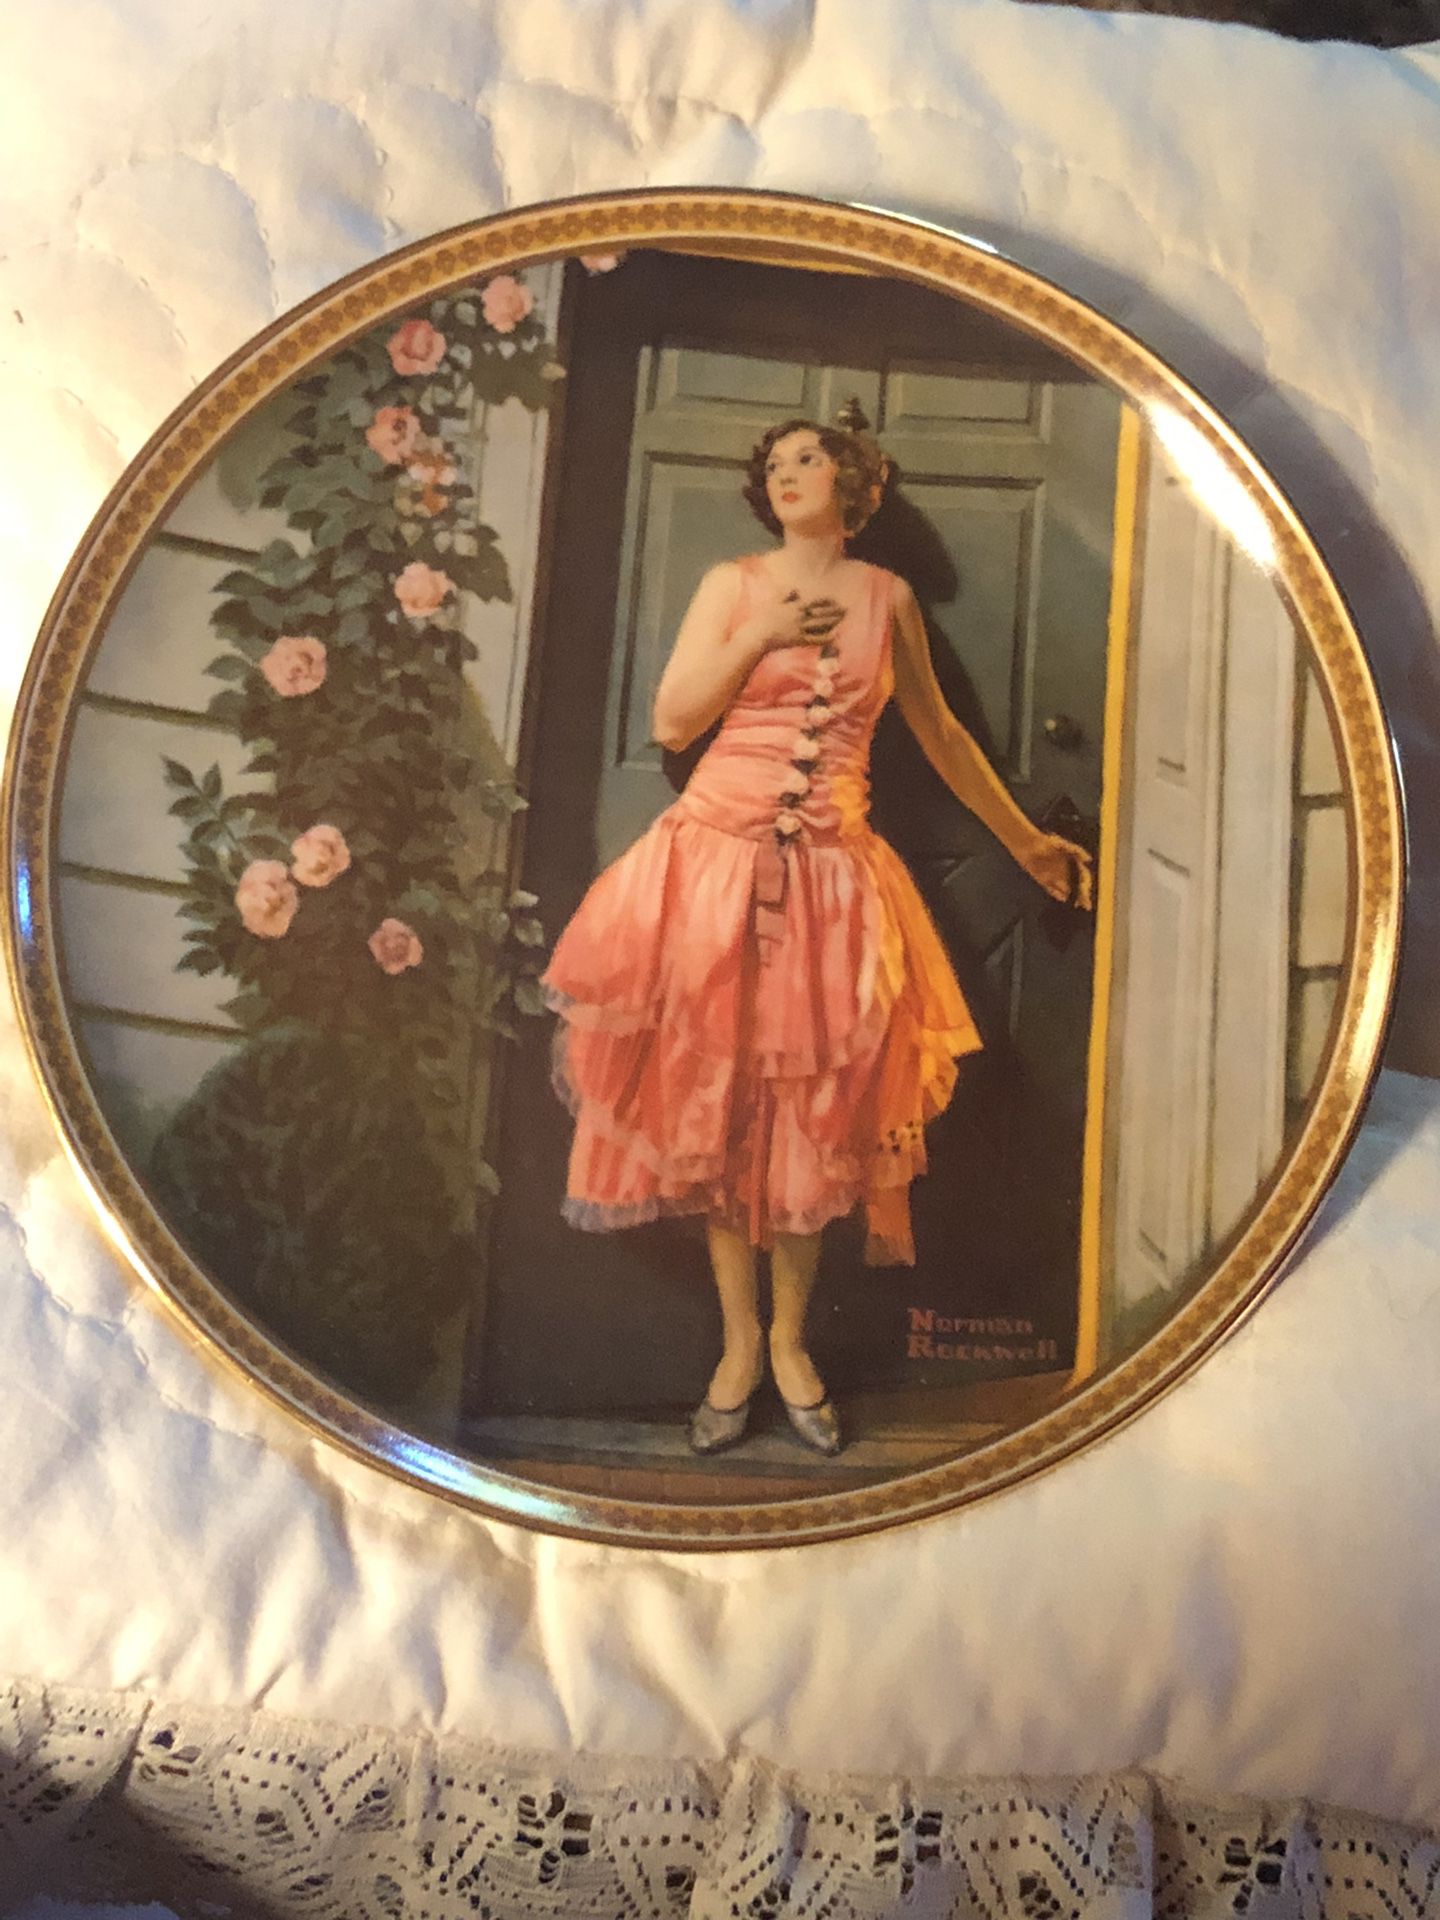 Rockwell Rediscovered Women Series Plates 